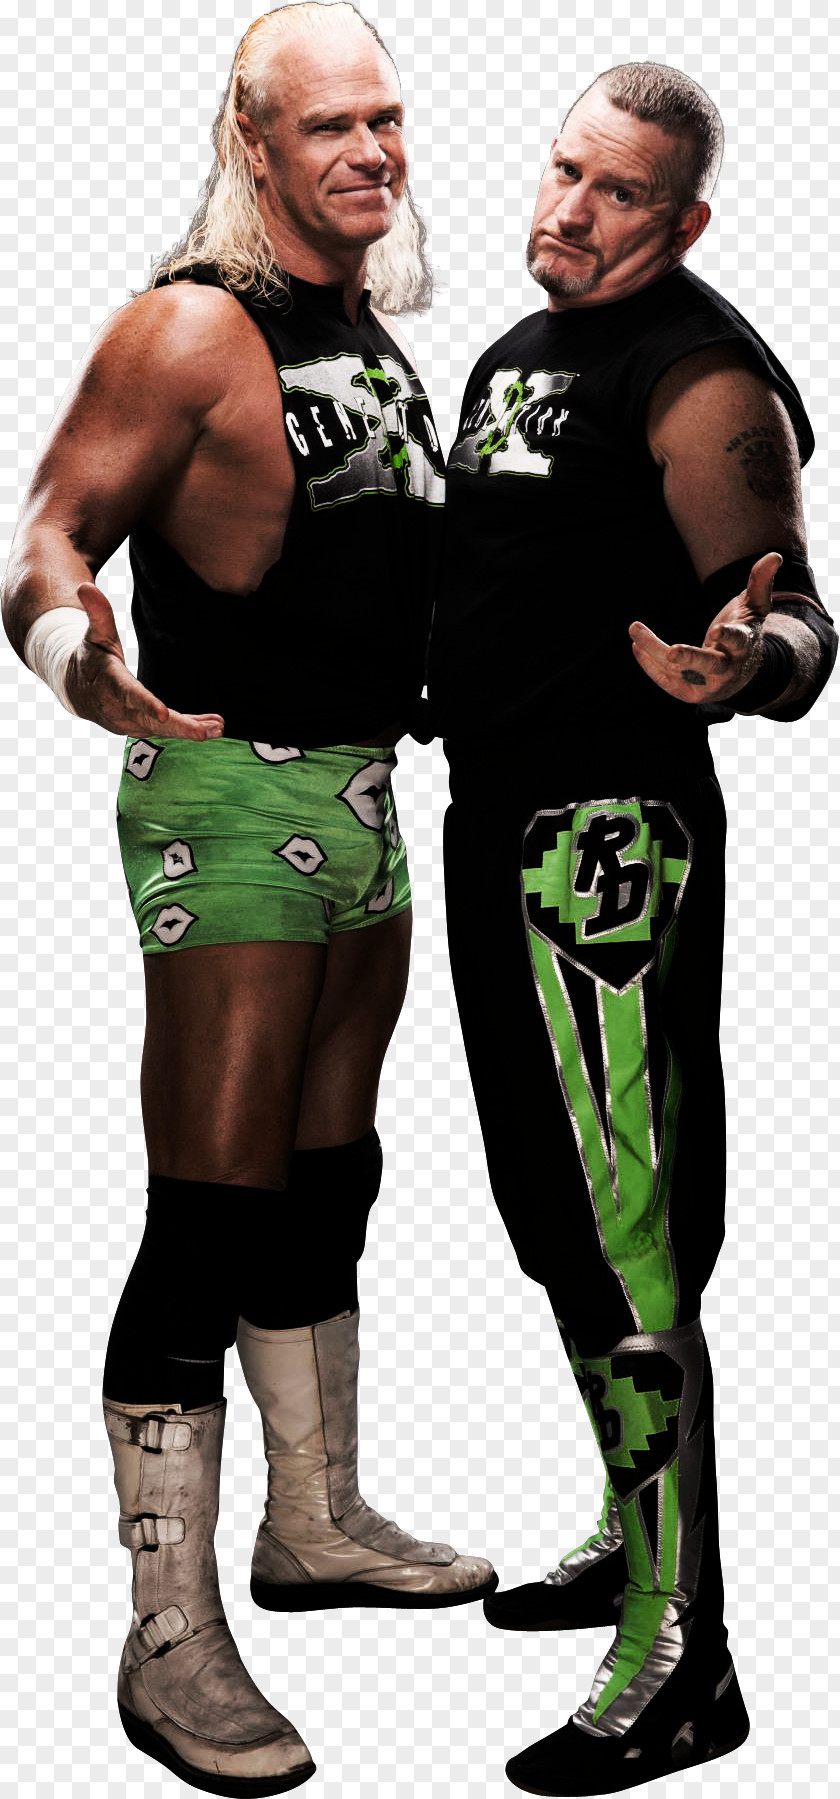 Big Show Road Dogg Billy Gunn D-Generation X Royal Rumble The New Age Outlaws PNG